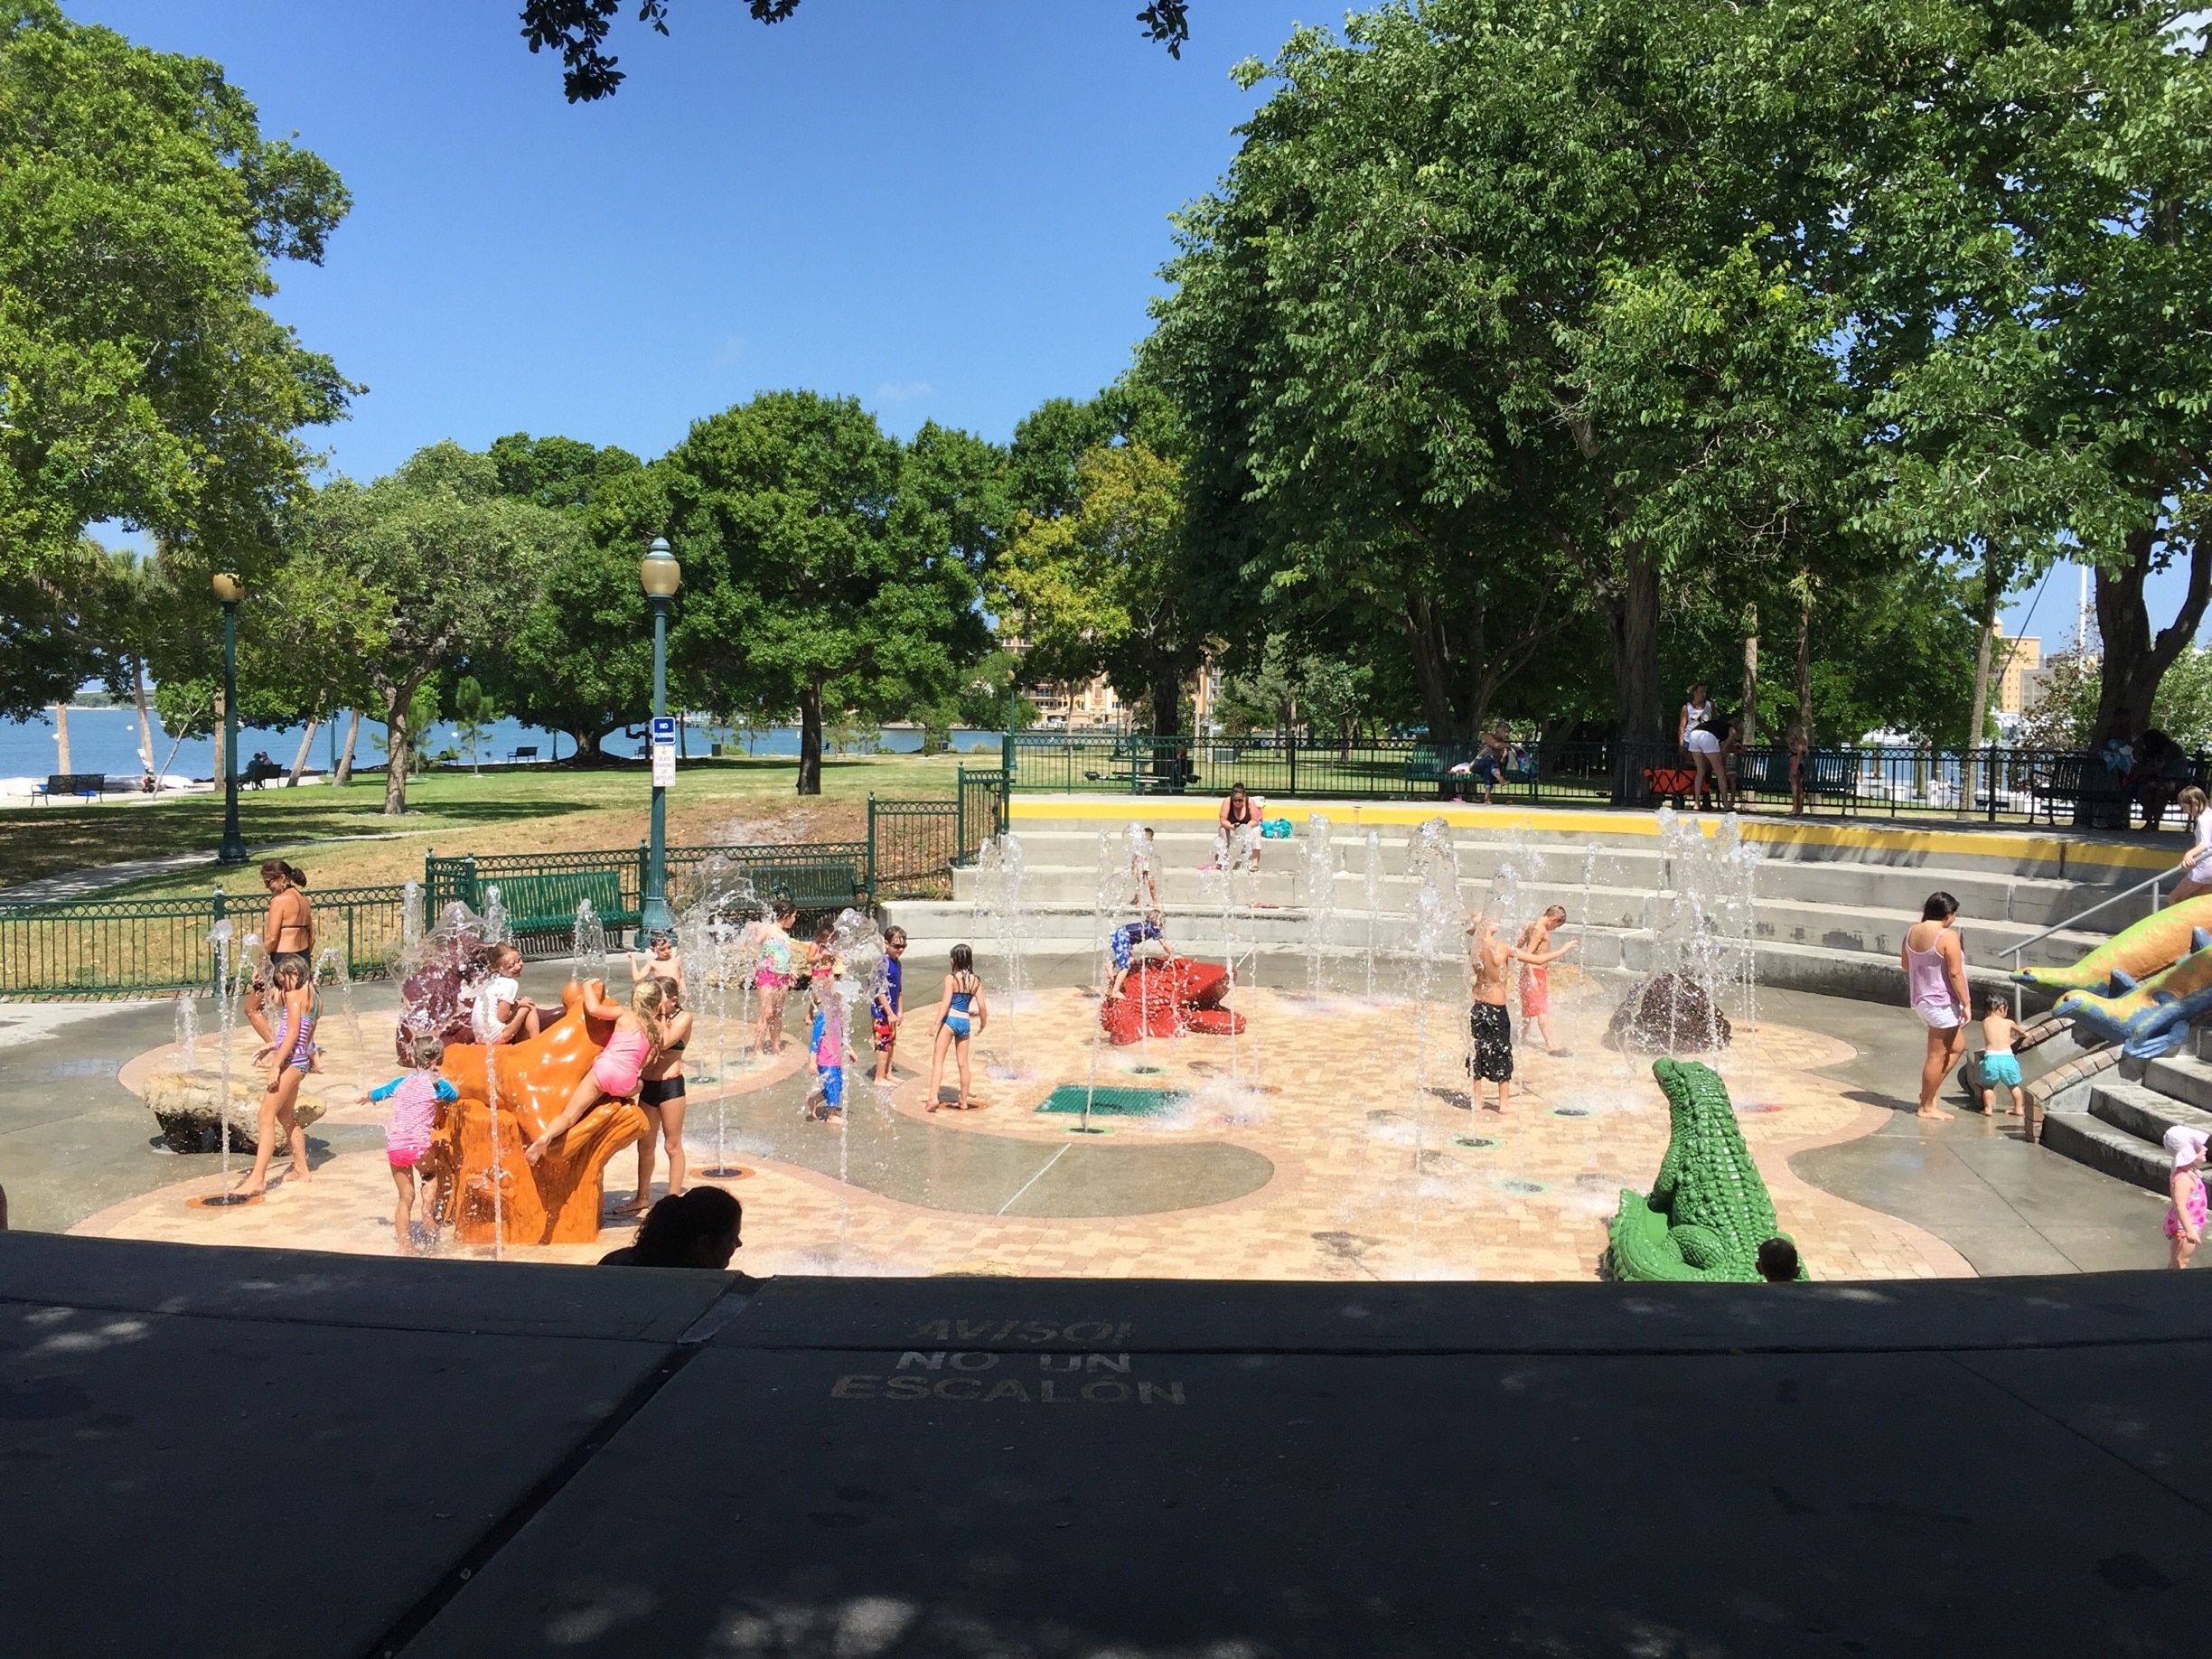 Nice park in Sarasota Florida, including water jets and playground, kids had a blast! 
There's also a tiki bar next door for a cheeky cocktail.
#kidsfun 